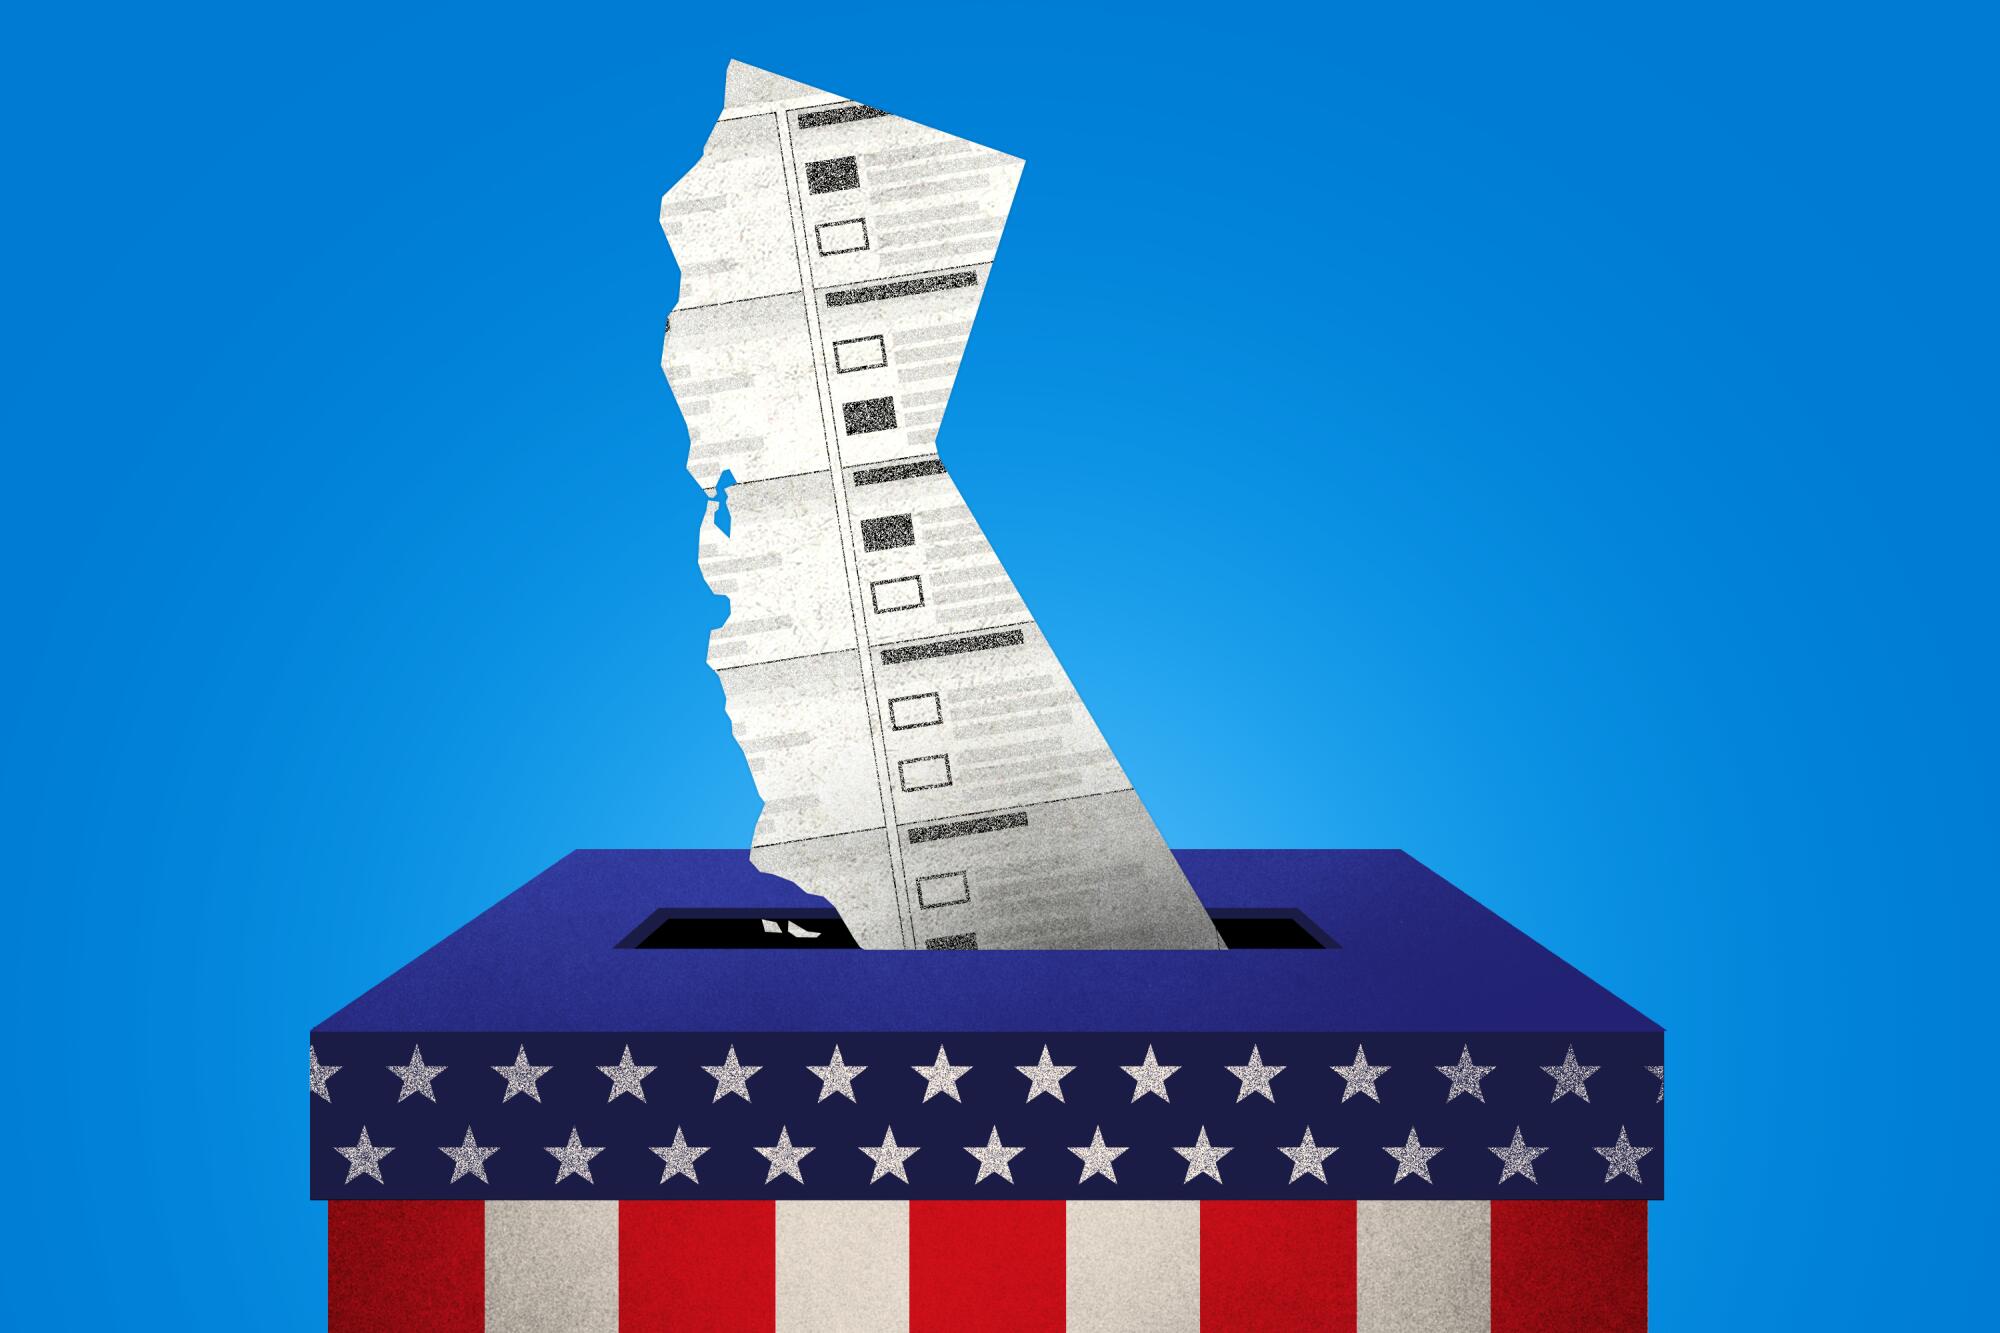 stars and stripes ballot box with a California-shaped ballot tucked in the slot